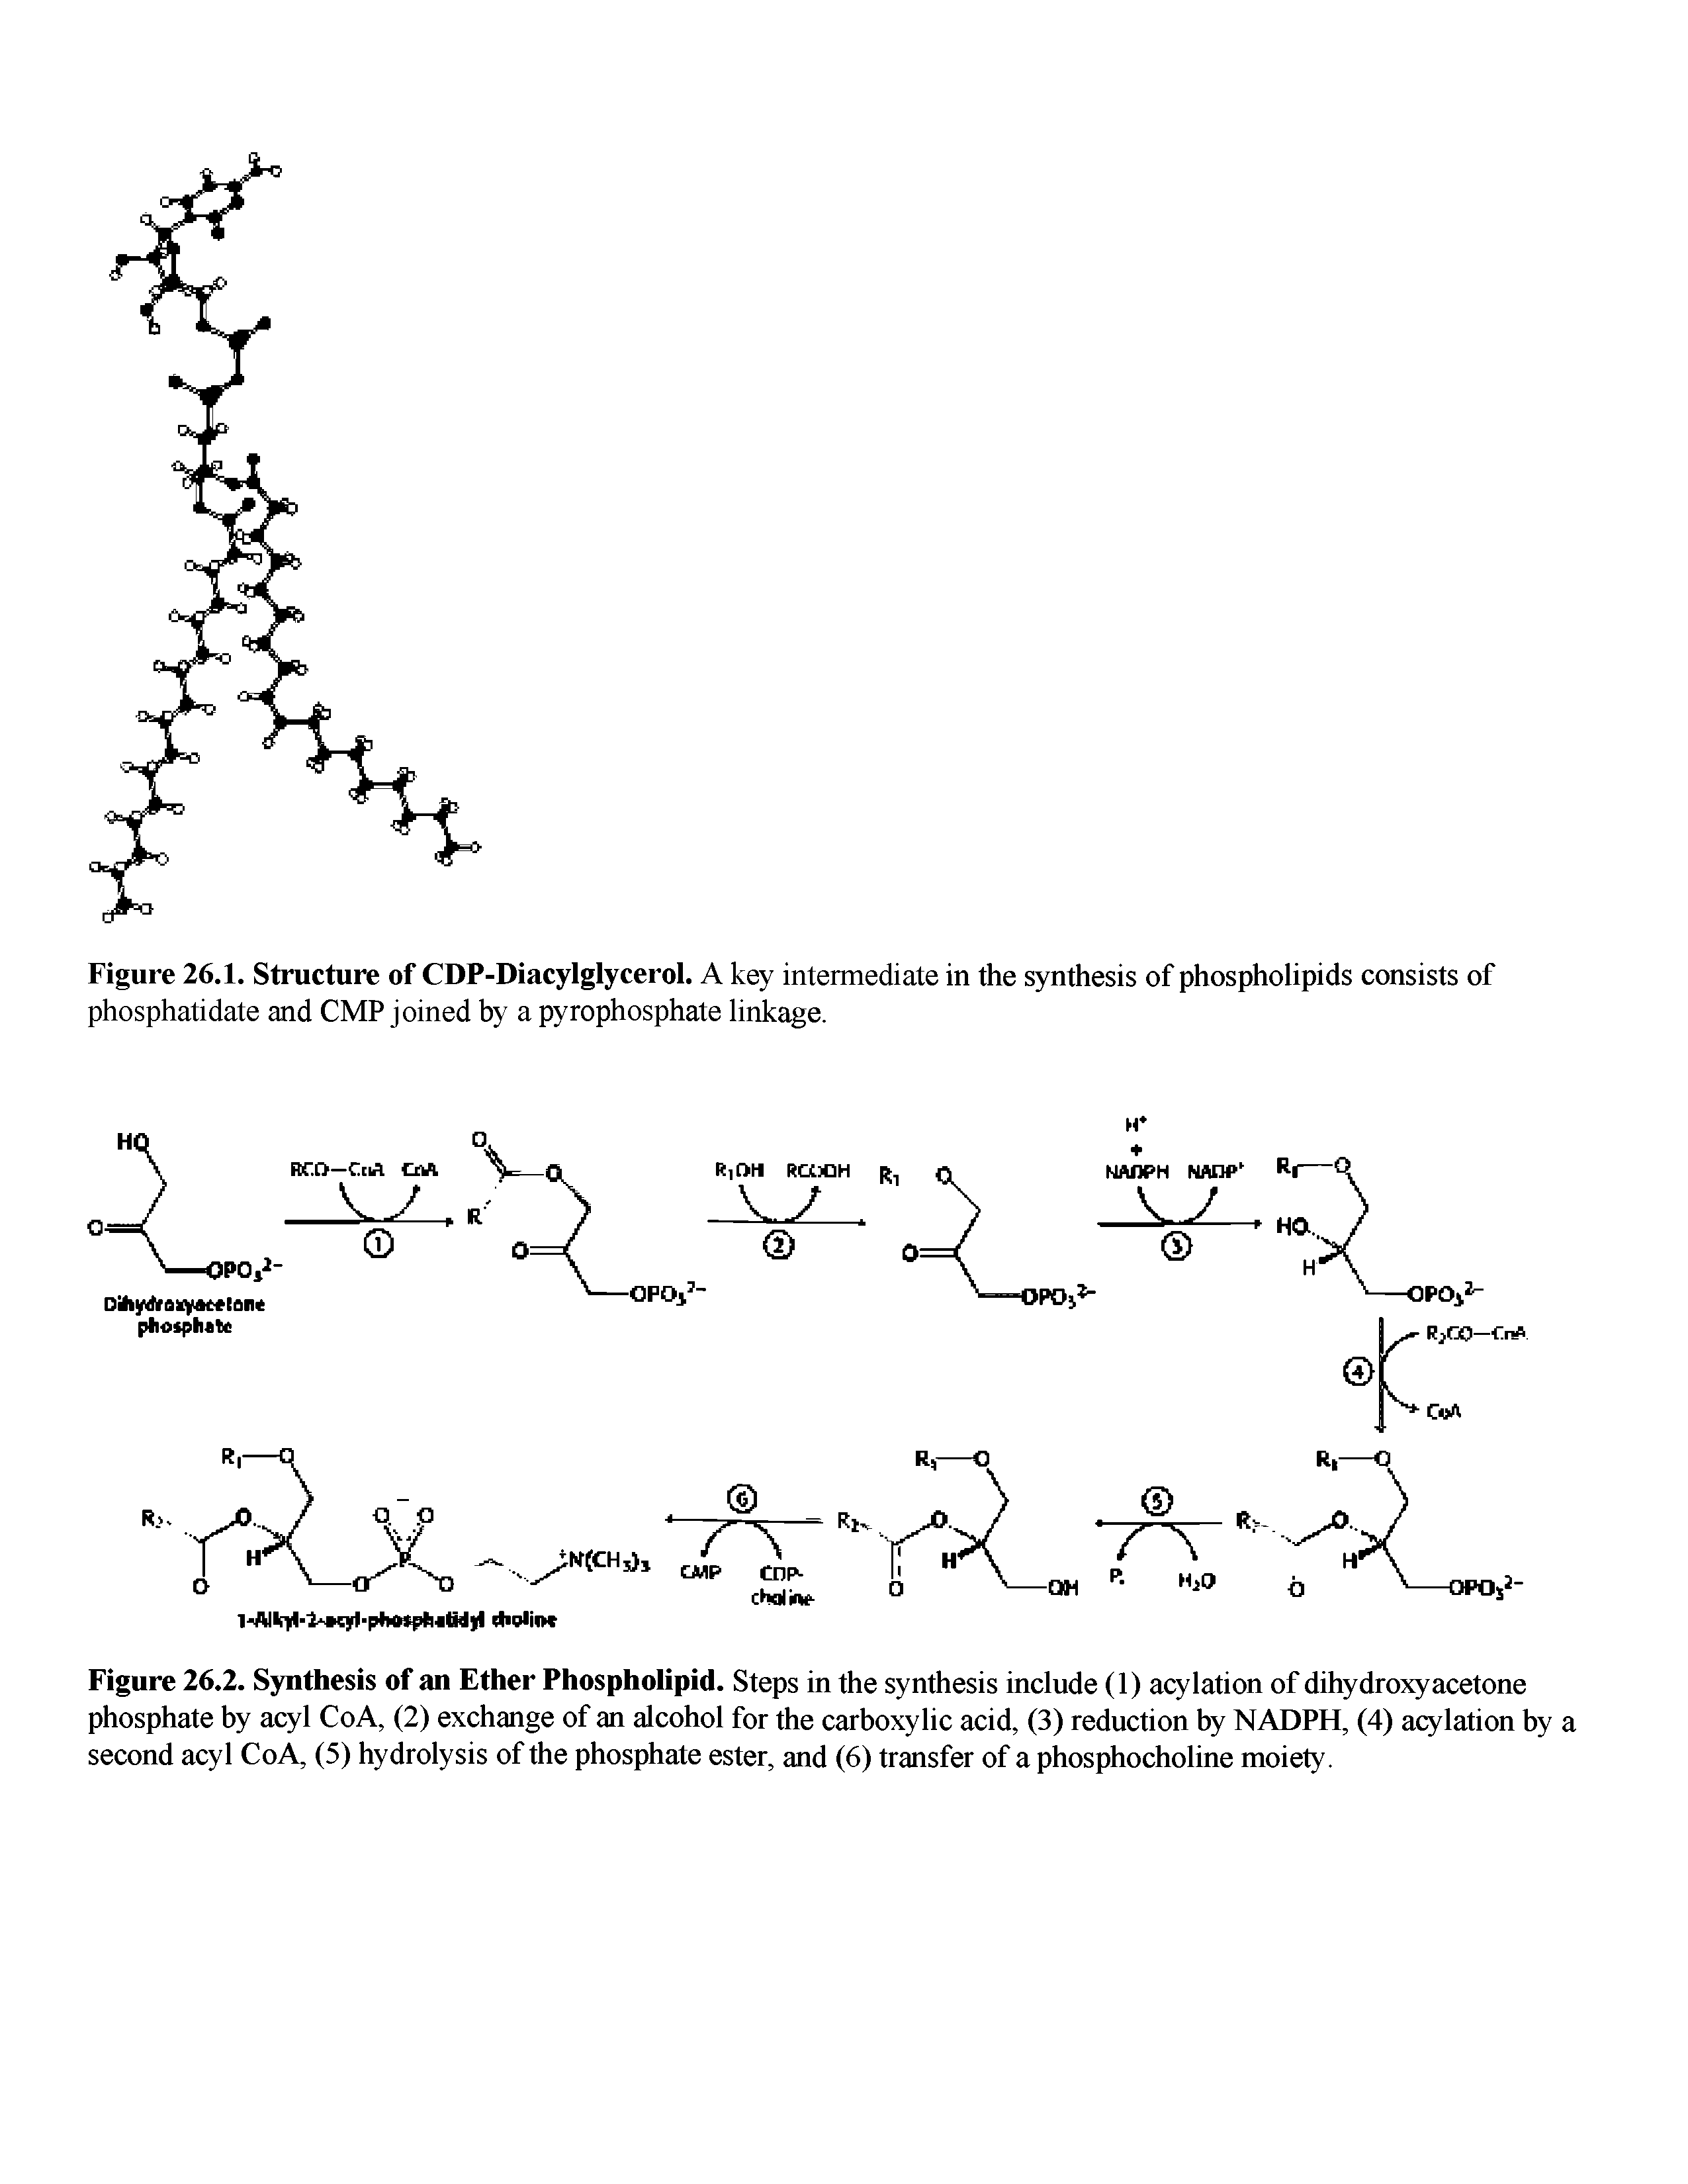 Figure 26.2. Synthesis of an Ether Phospholipid. Steps in the synthesis include (1) acylation of dihydroxyacetone phosphate by acyl CoA, (2) exchange of an alcohol for the carboxylic acid, (3) reduction by NADPH, (4) acylation by a second acyl CoA, (5) hydrolysis of the phosphate ester, and (6) transfer of a phosphocholine moiety.